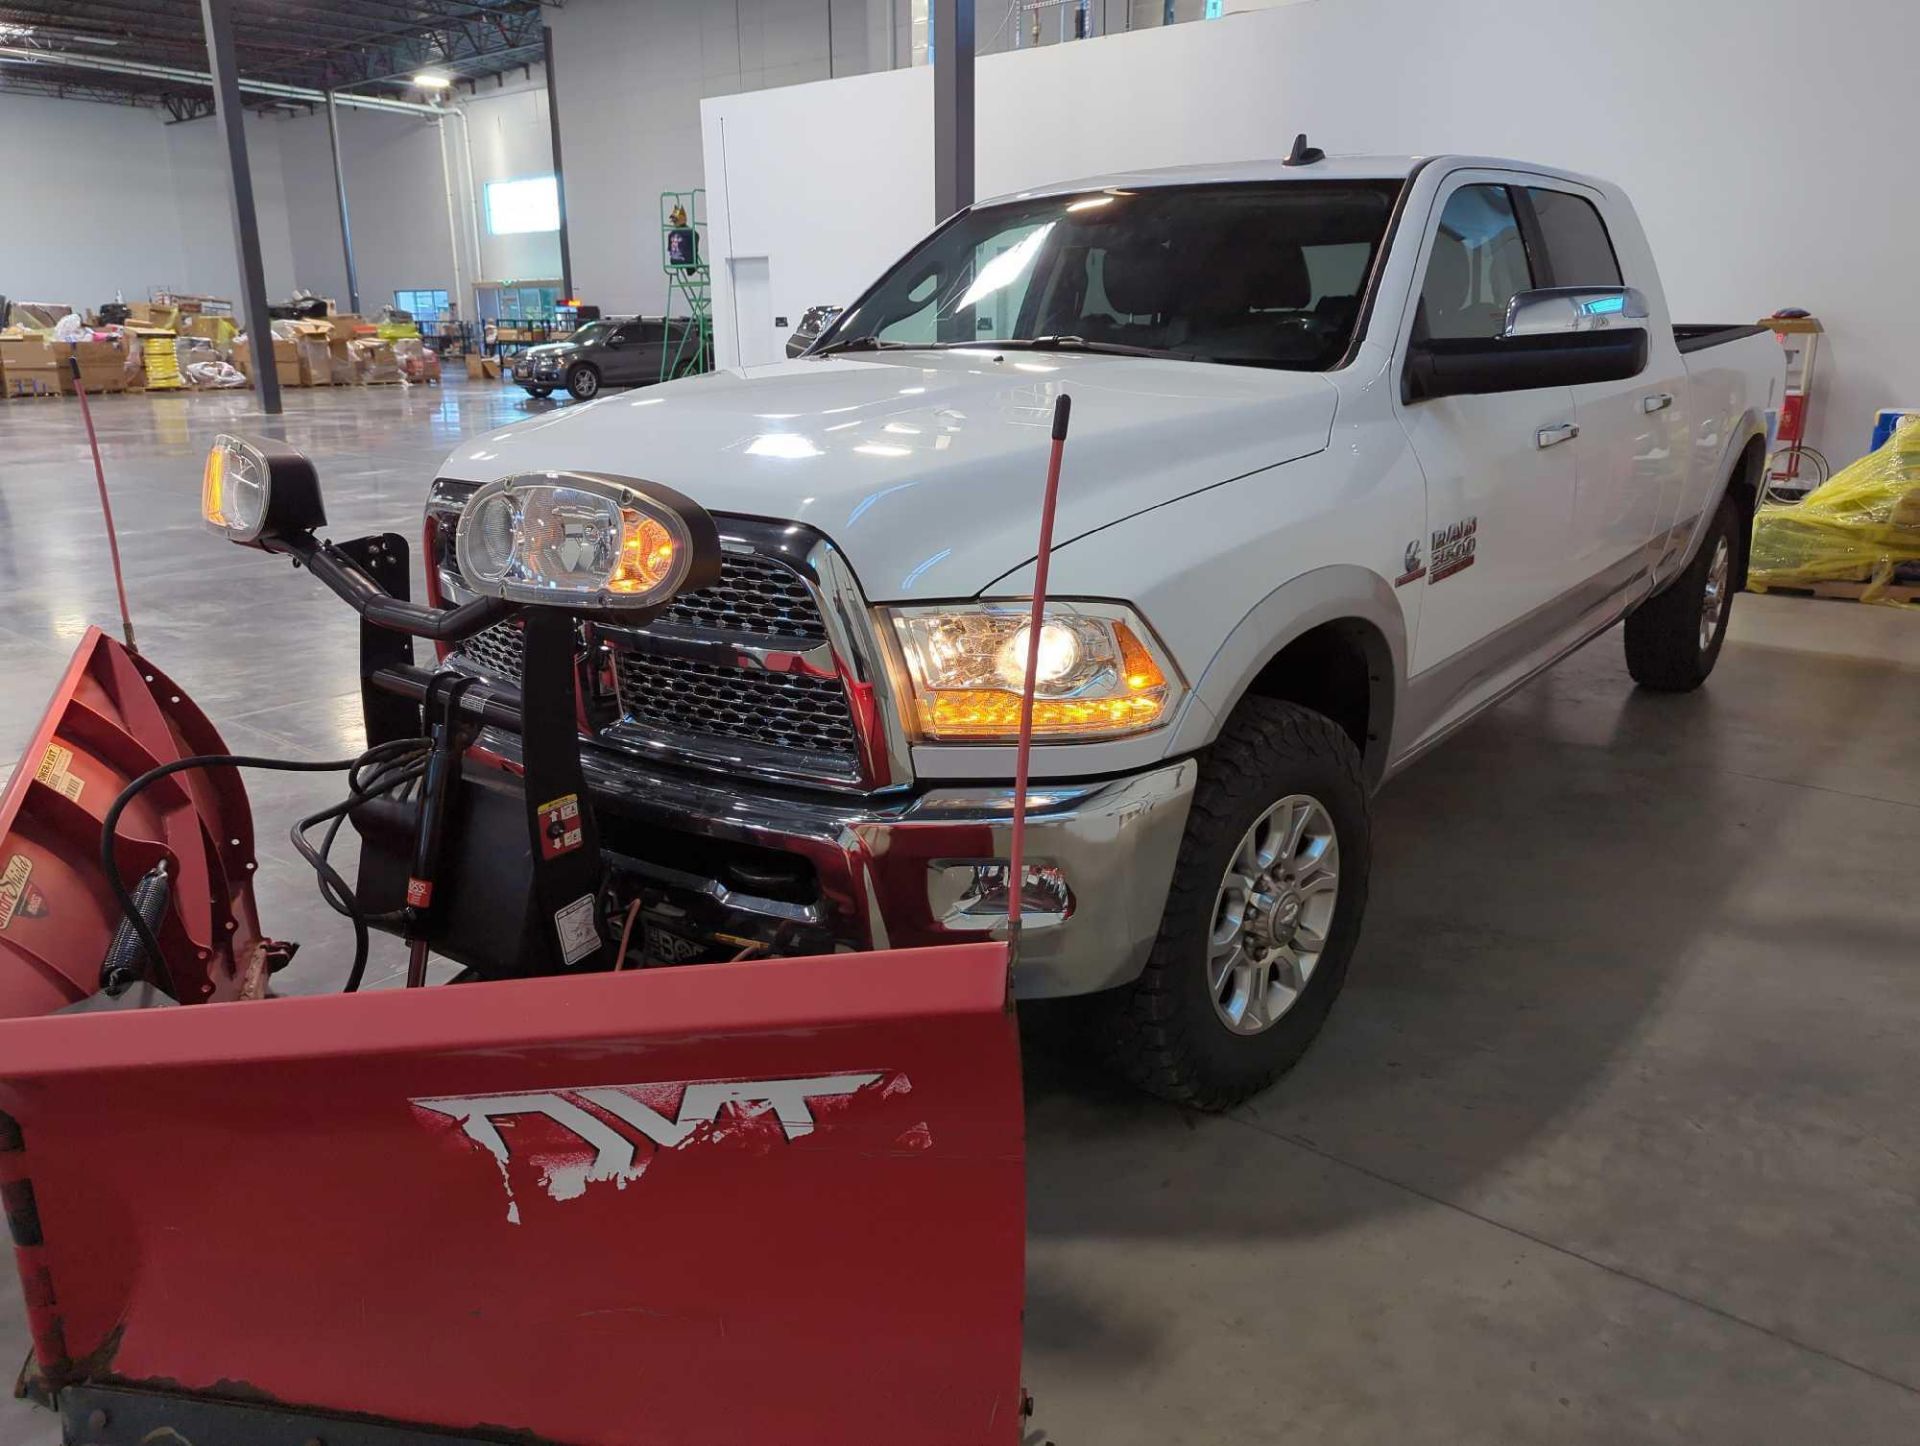 2013 Dodge Ram 3500 with plow - Image 3 of 14